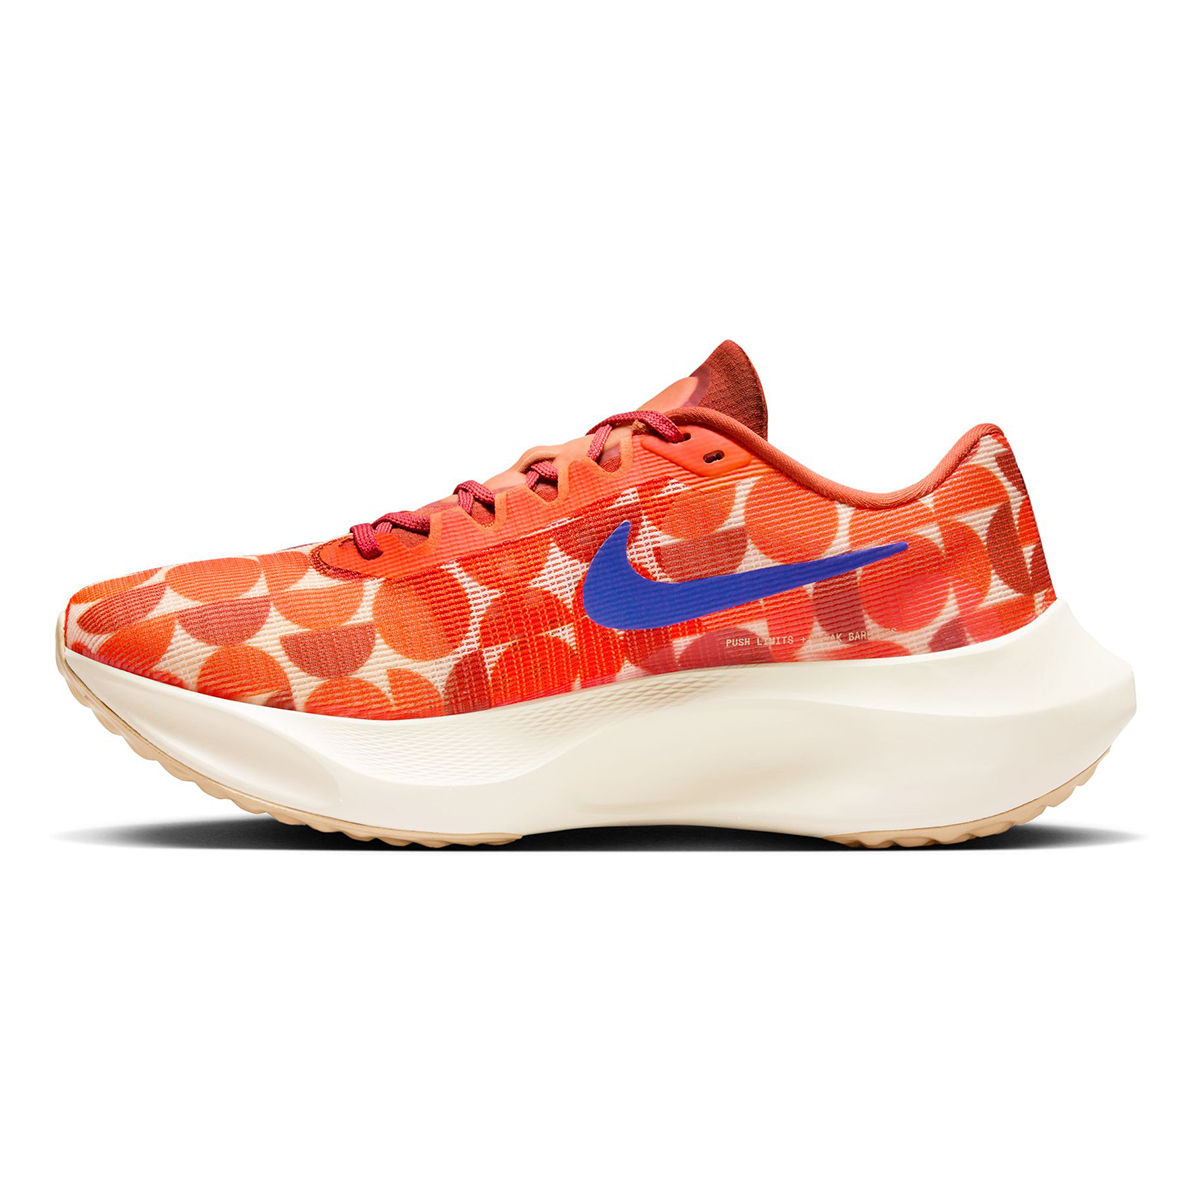 Nike Zoom Fly 5 Premium, , large image number null